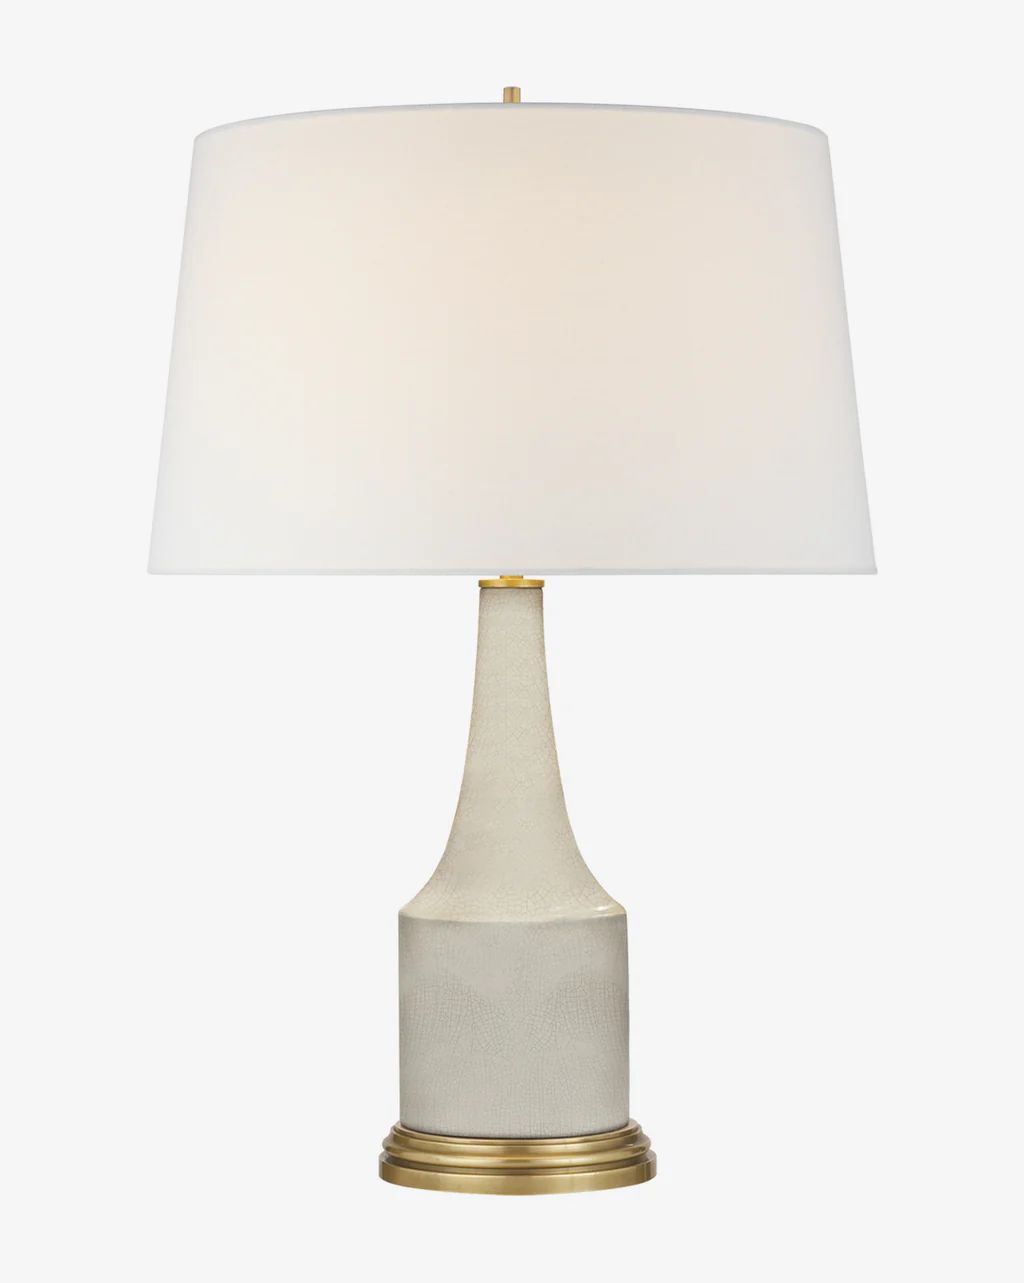 Sawyer Table Lamp | McGee & Co.